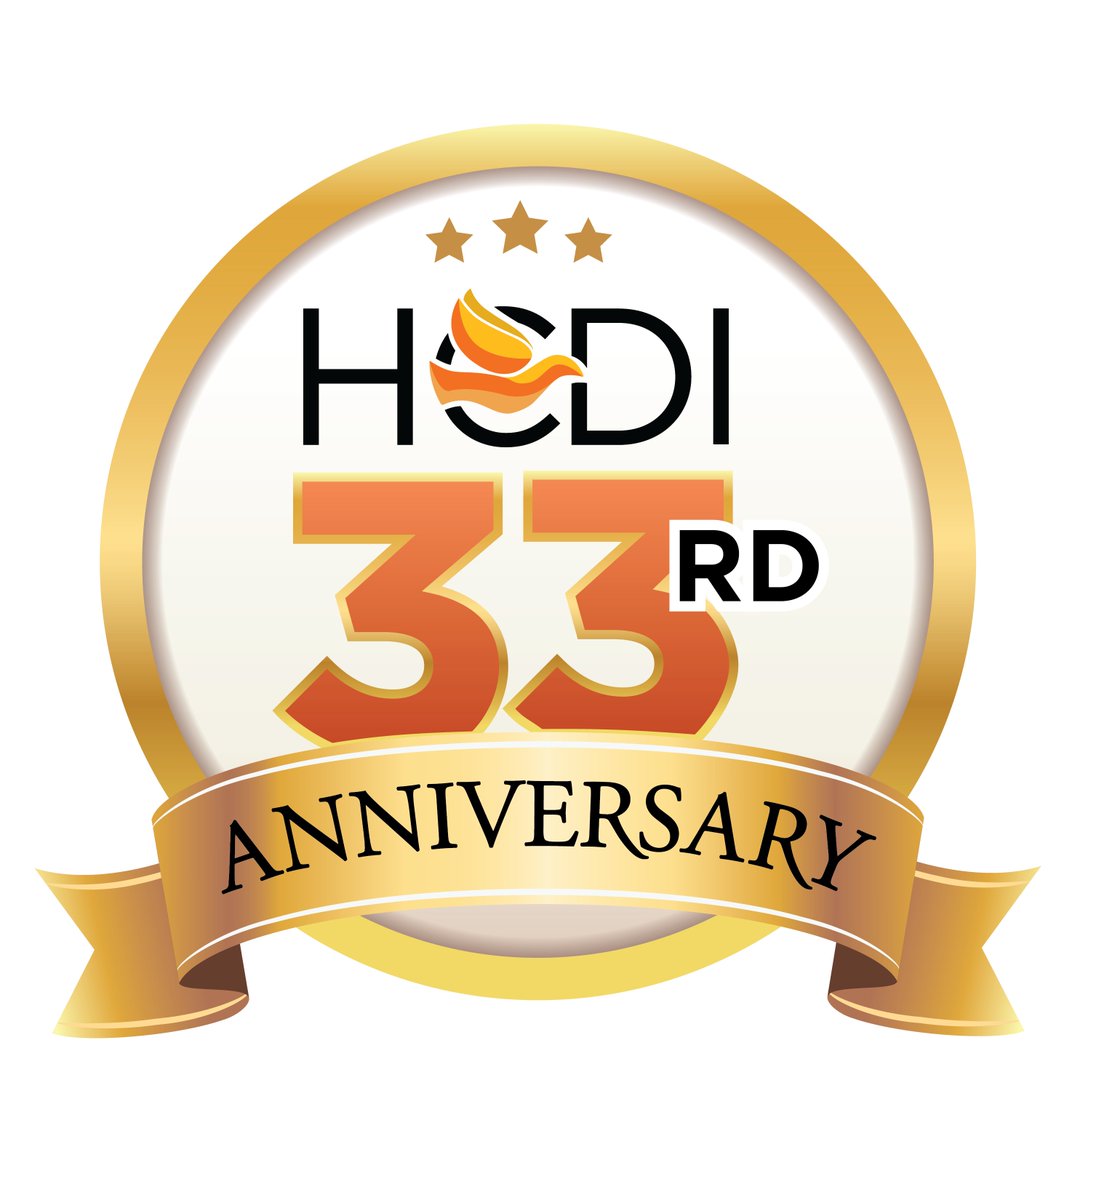 HCD International is celebrating 33 years of improving care for all, especially vulnerable populations. Thanks to our clients, team, and partners for your support. Here's to 33 more years of positive impact! Happy anniversary!🧡 #HCDInternational #healthequity